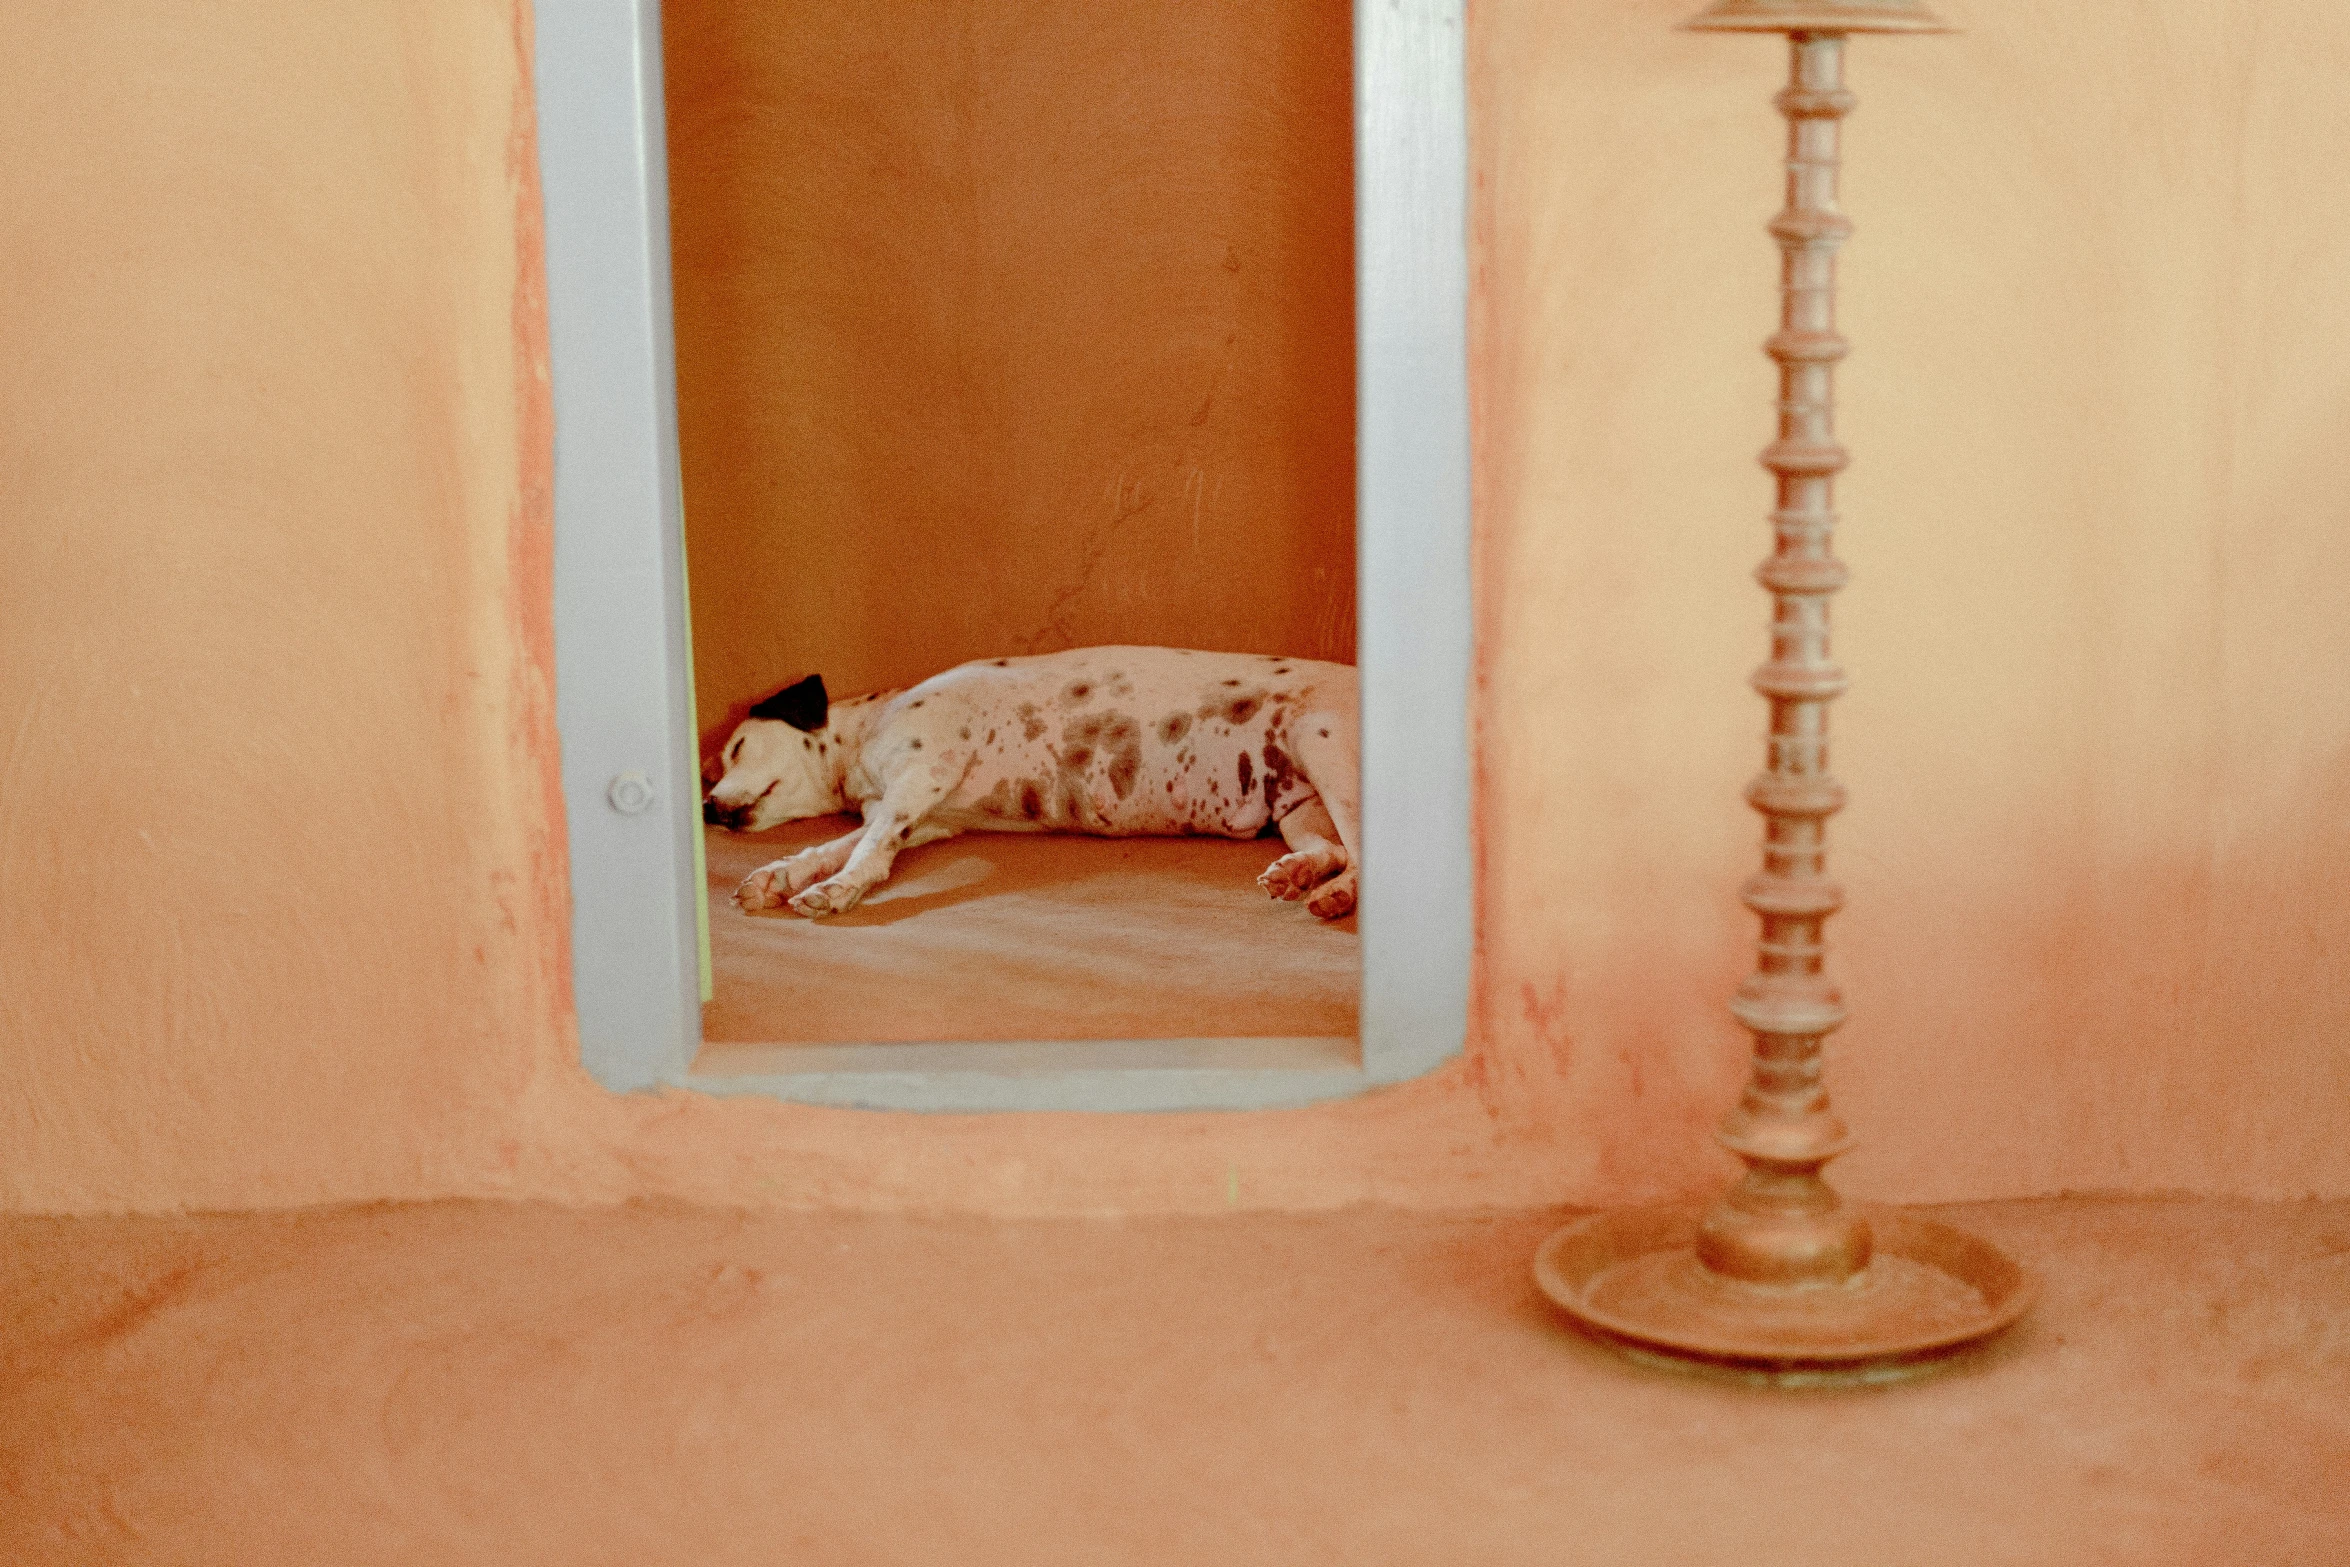 a dog curled up sleeping under a mirror